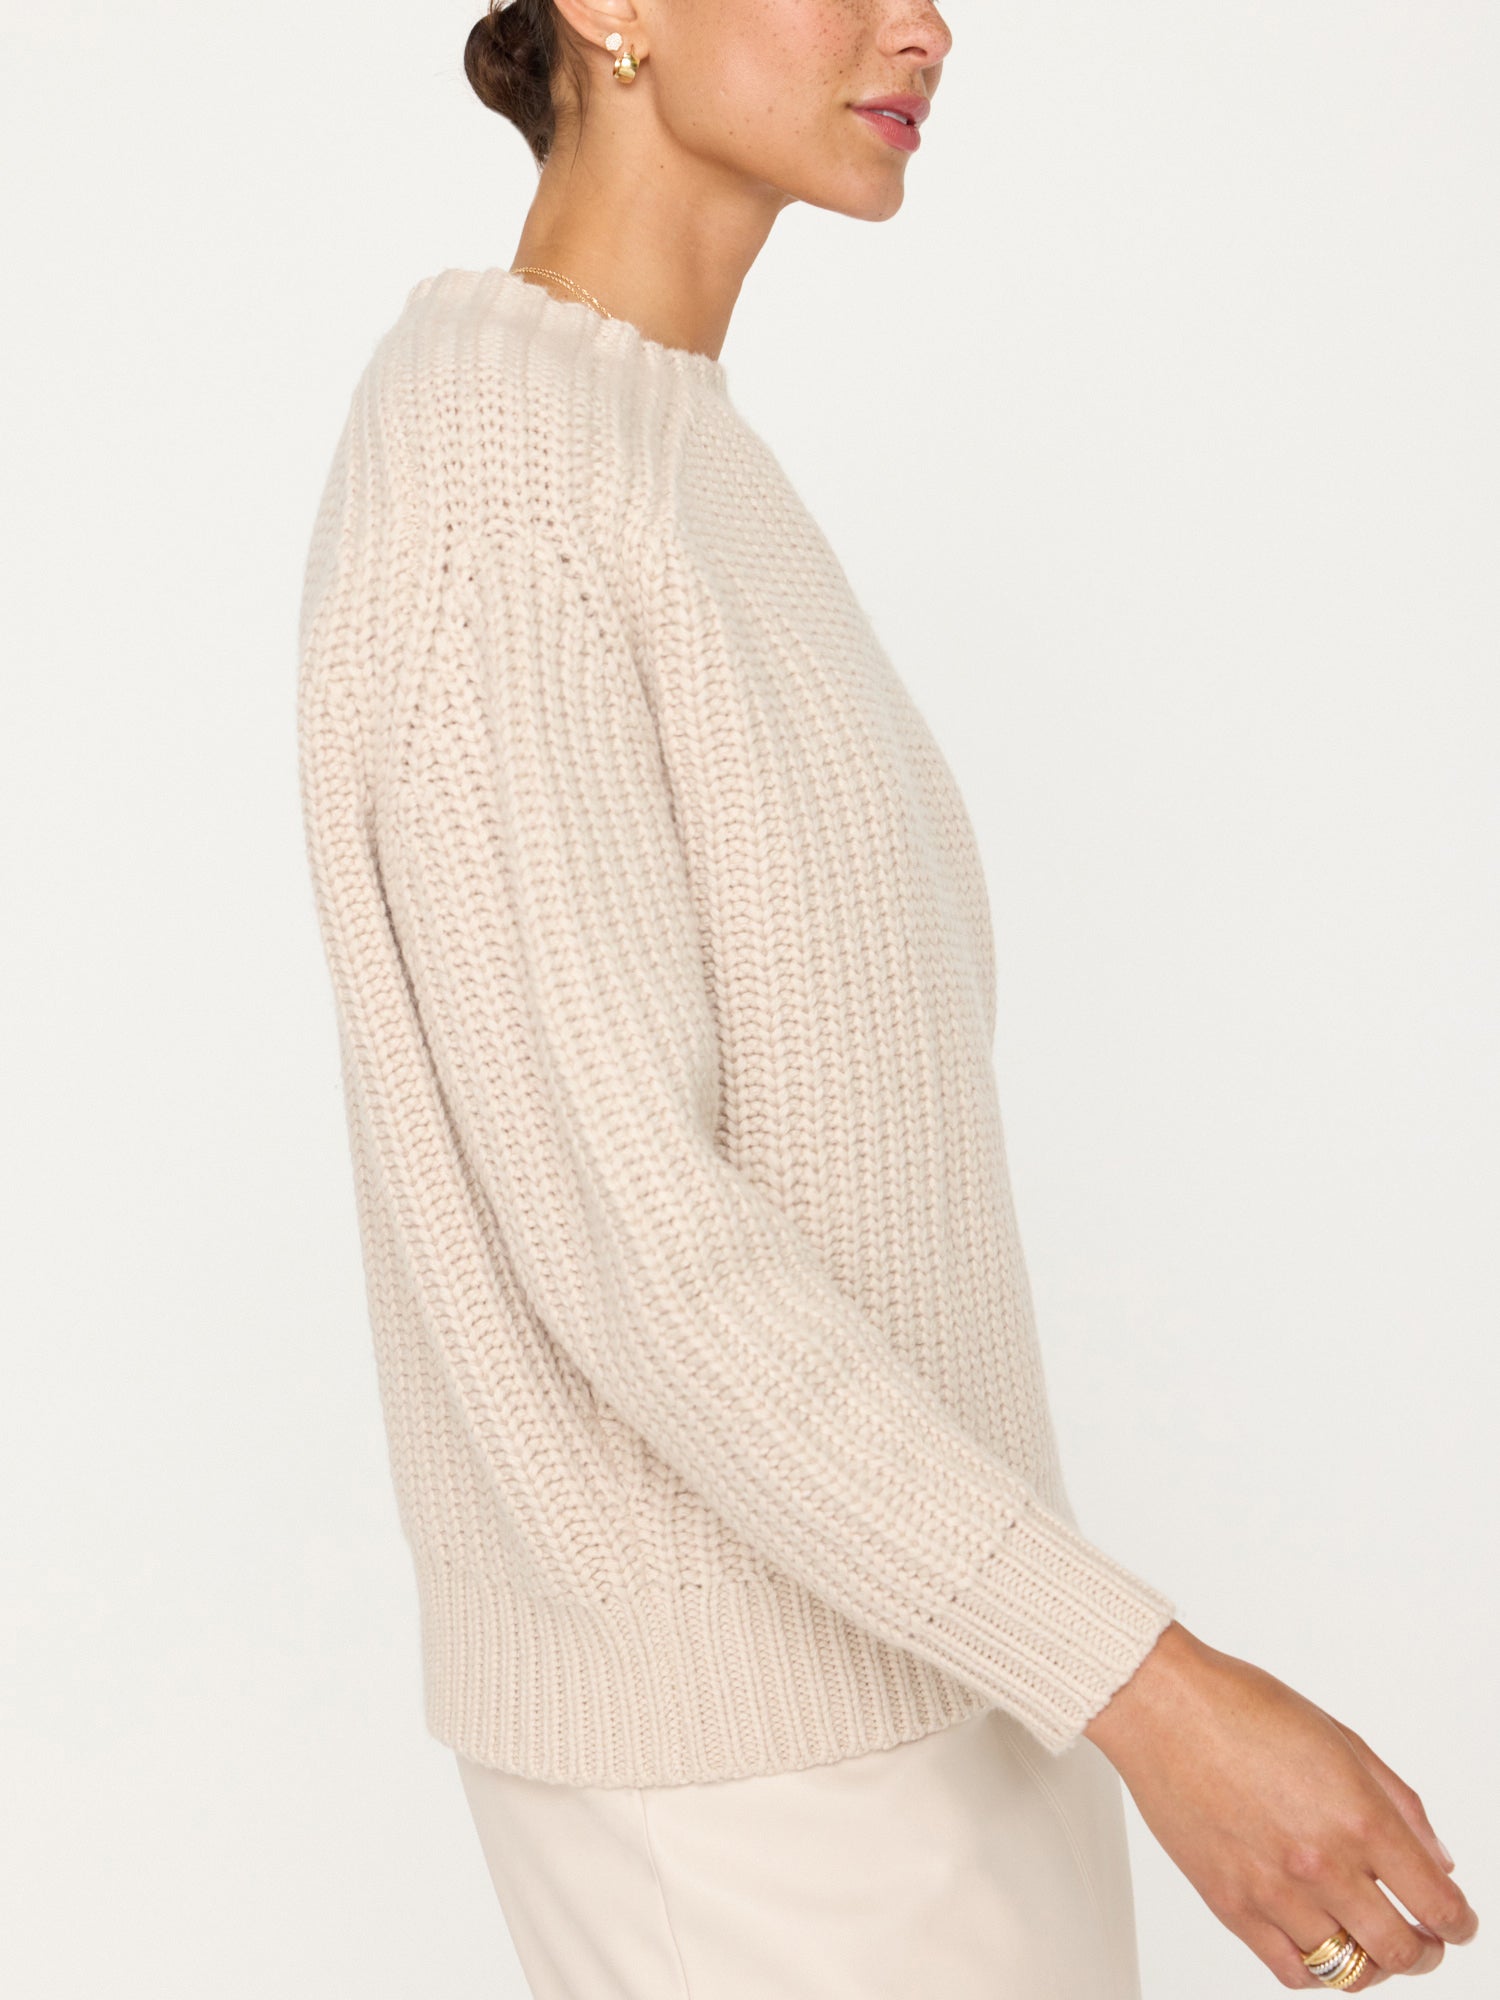 Beckett beige ribbed crewneck pullover sweater side view